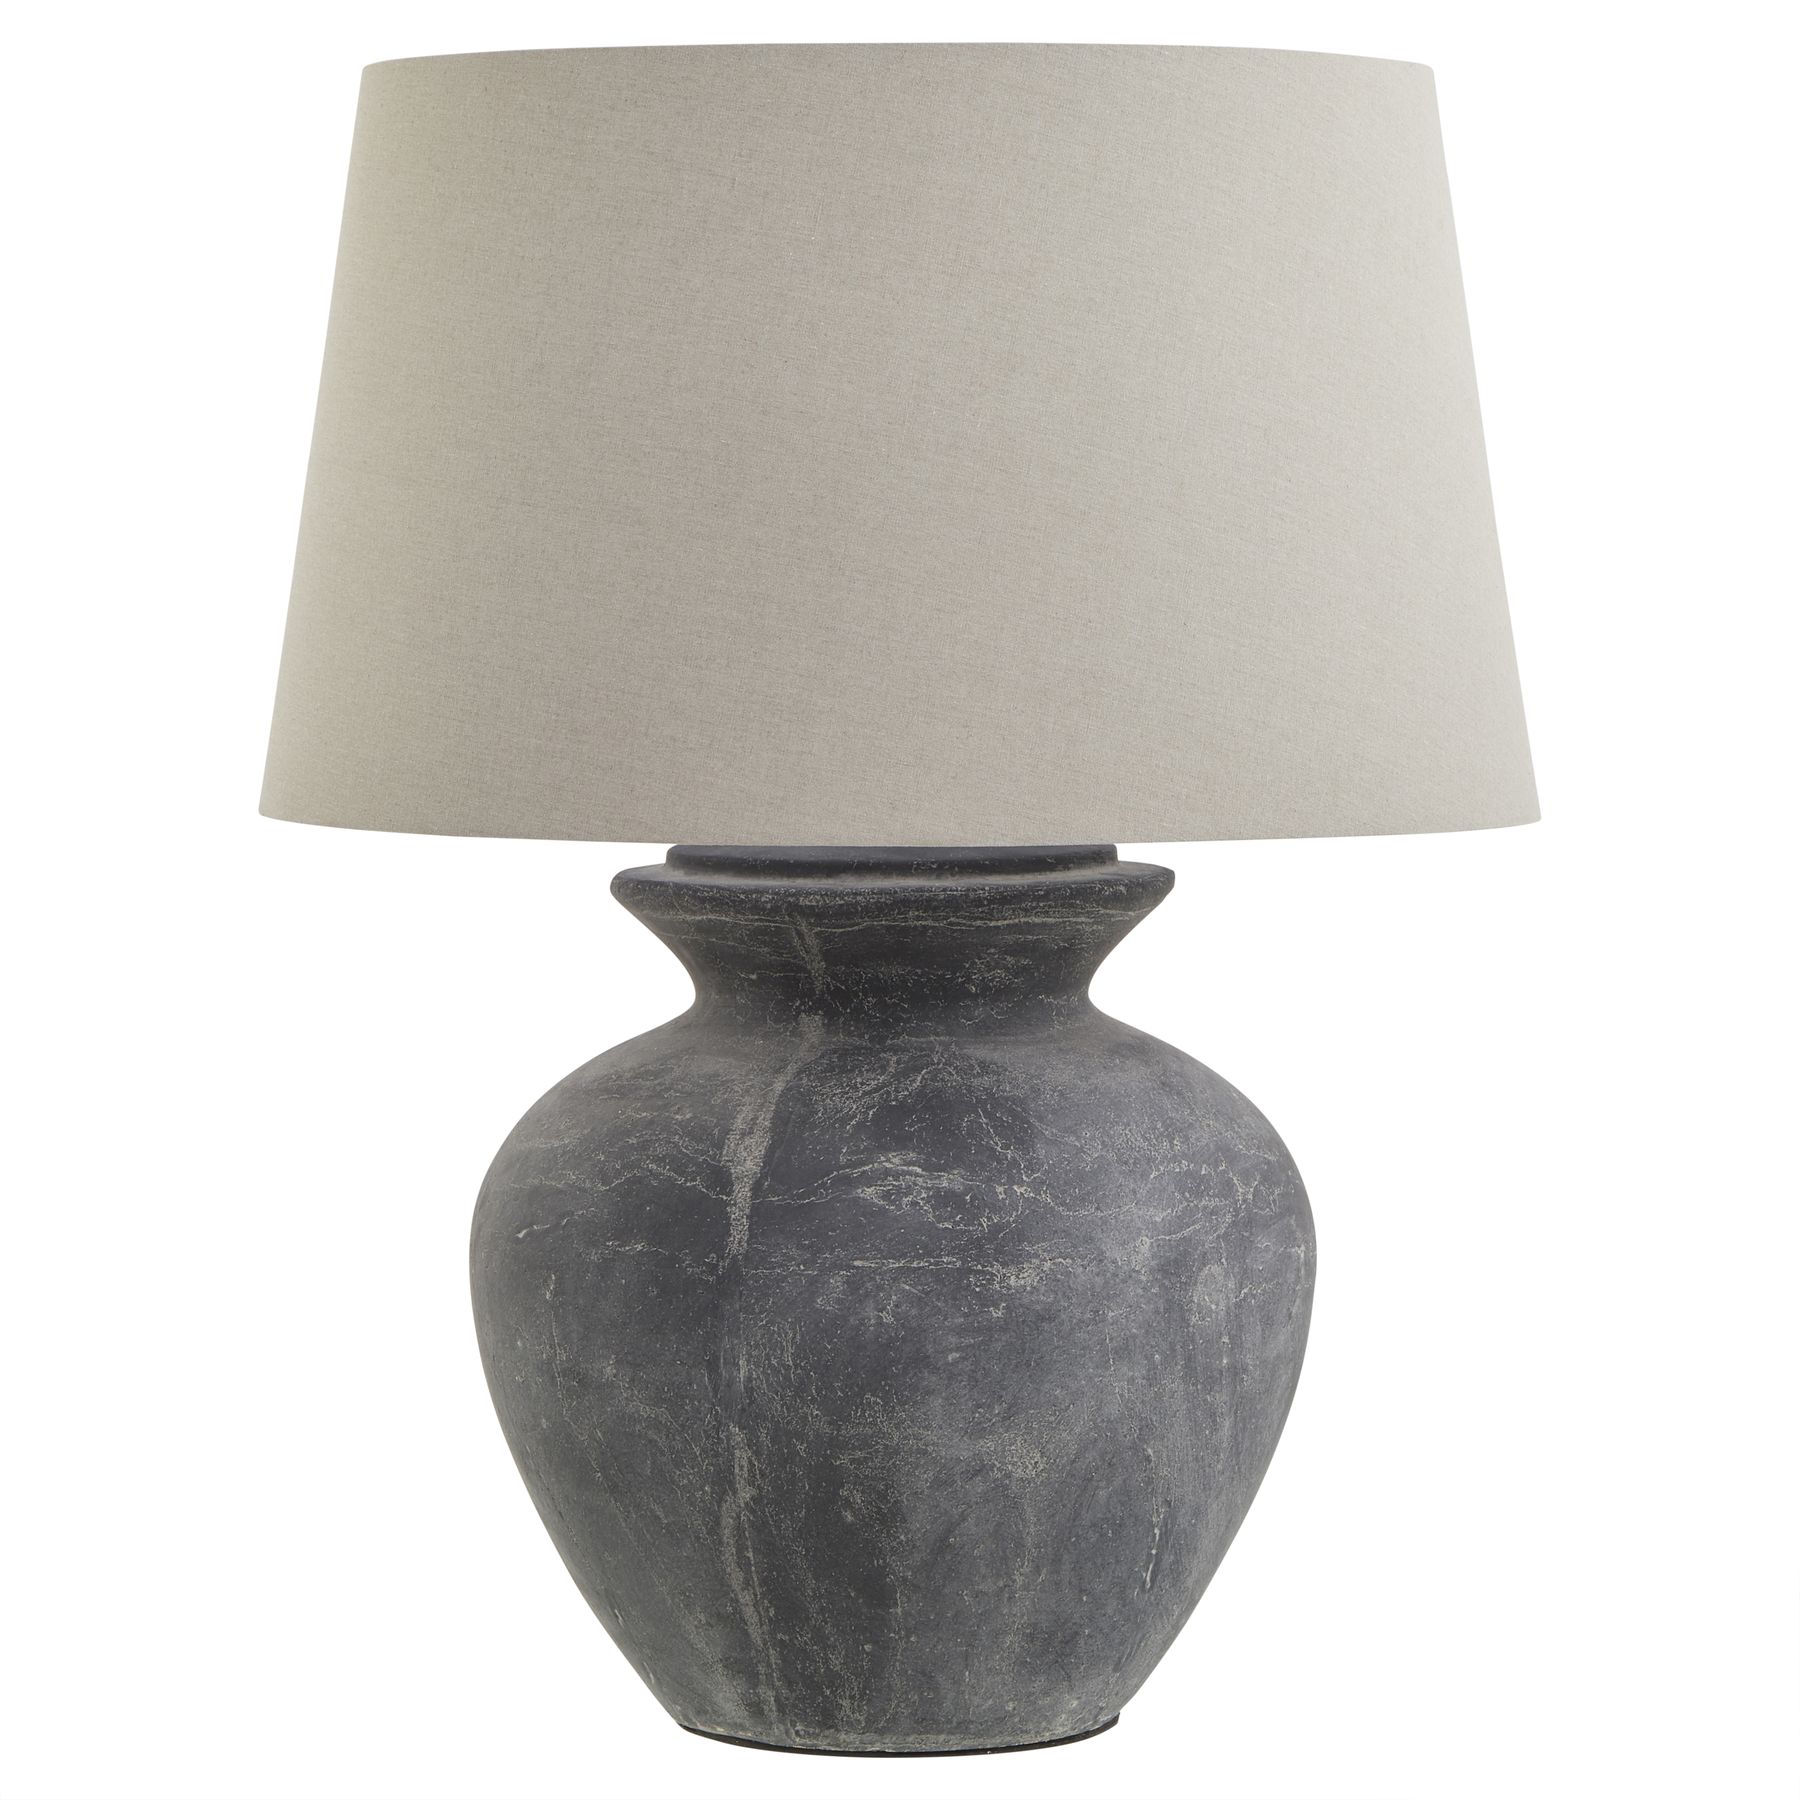 Amalfi Grey Round Table Lamp With Linen Shade - Image 1